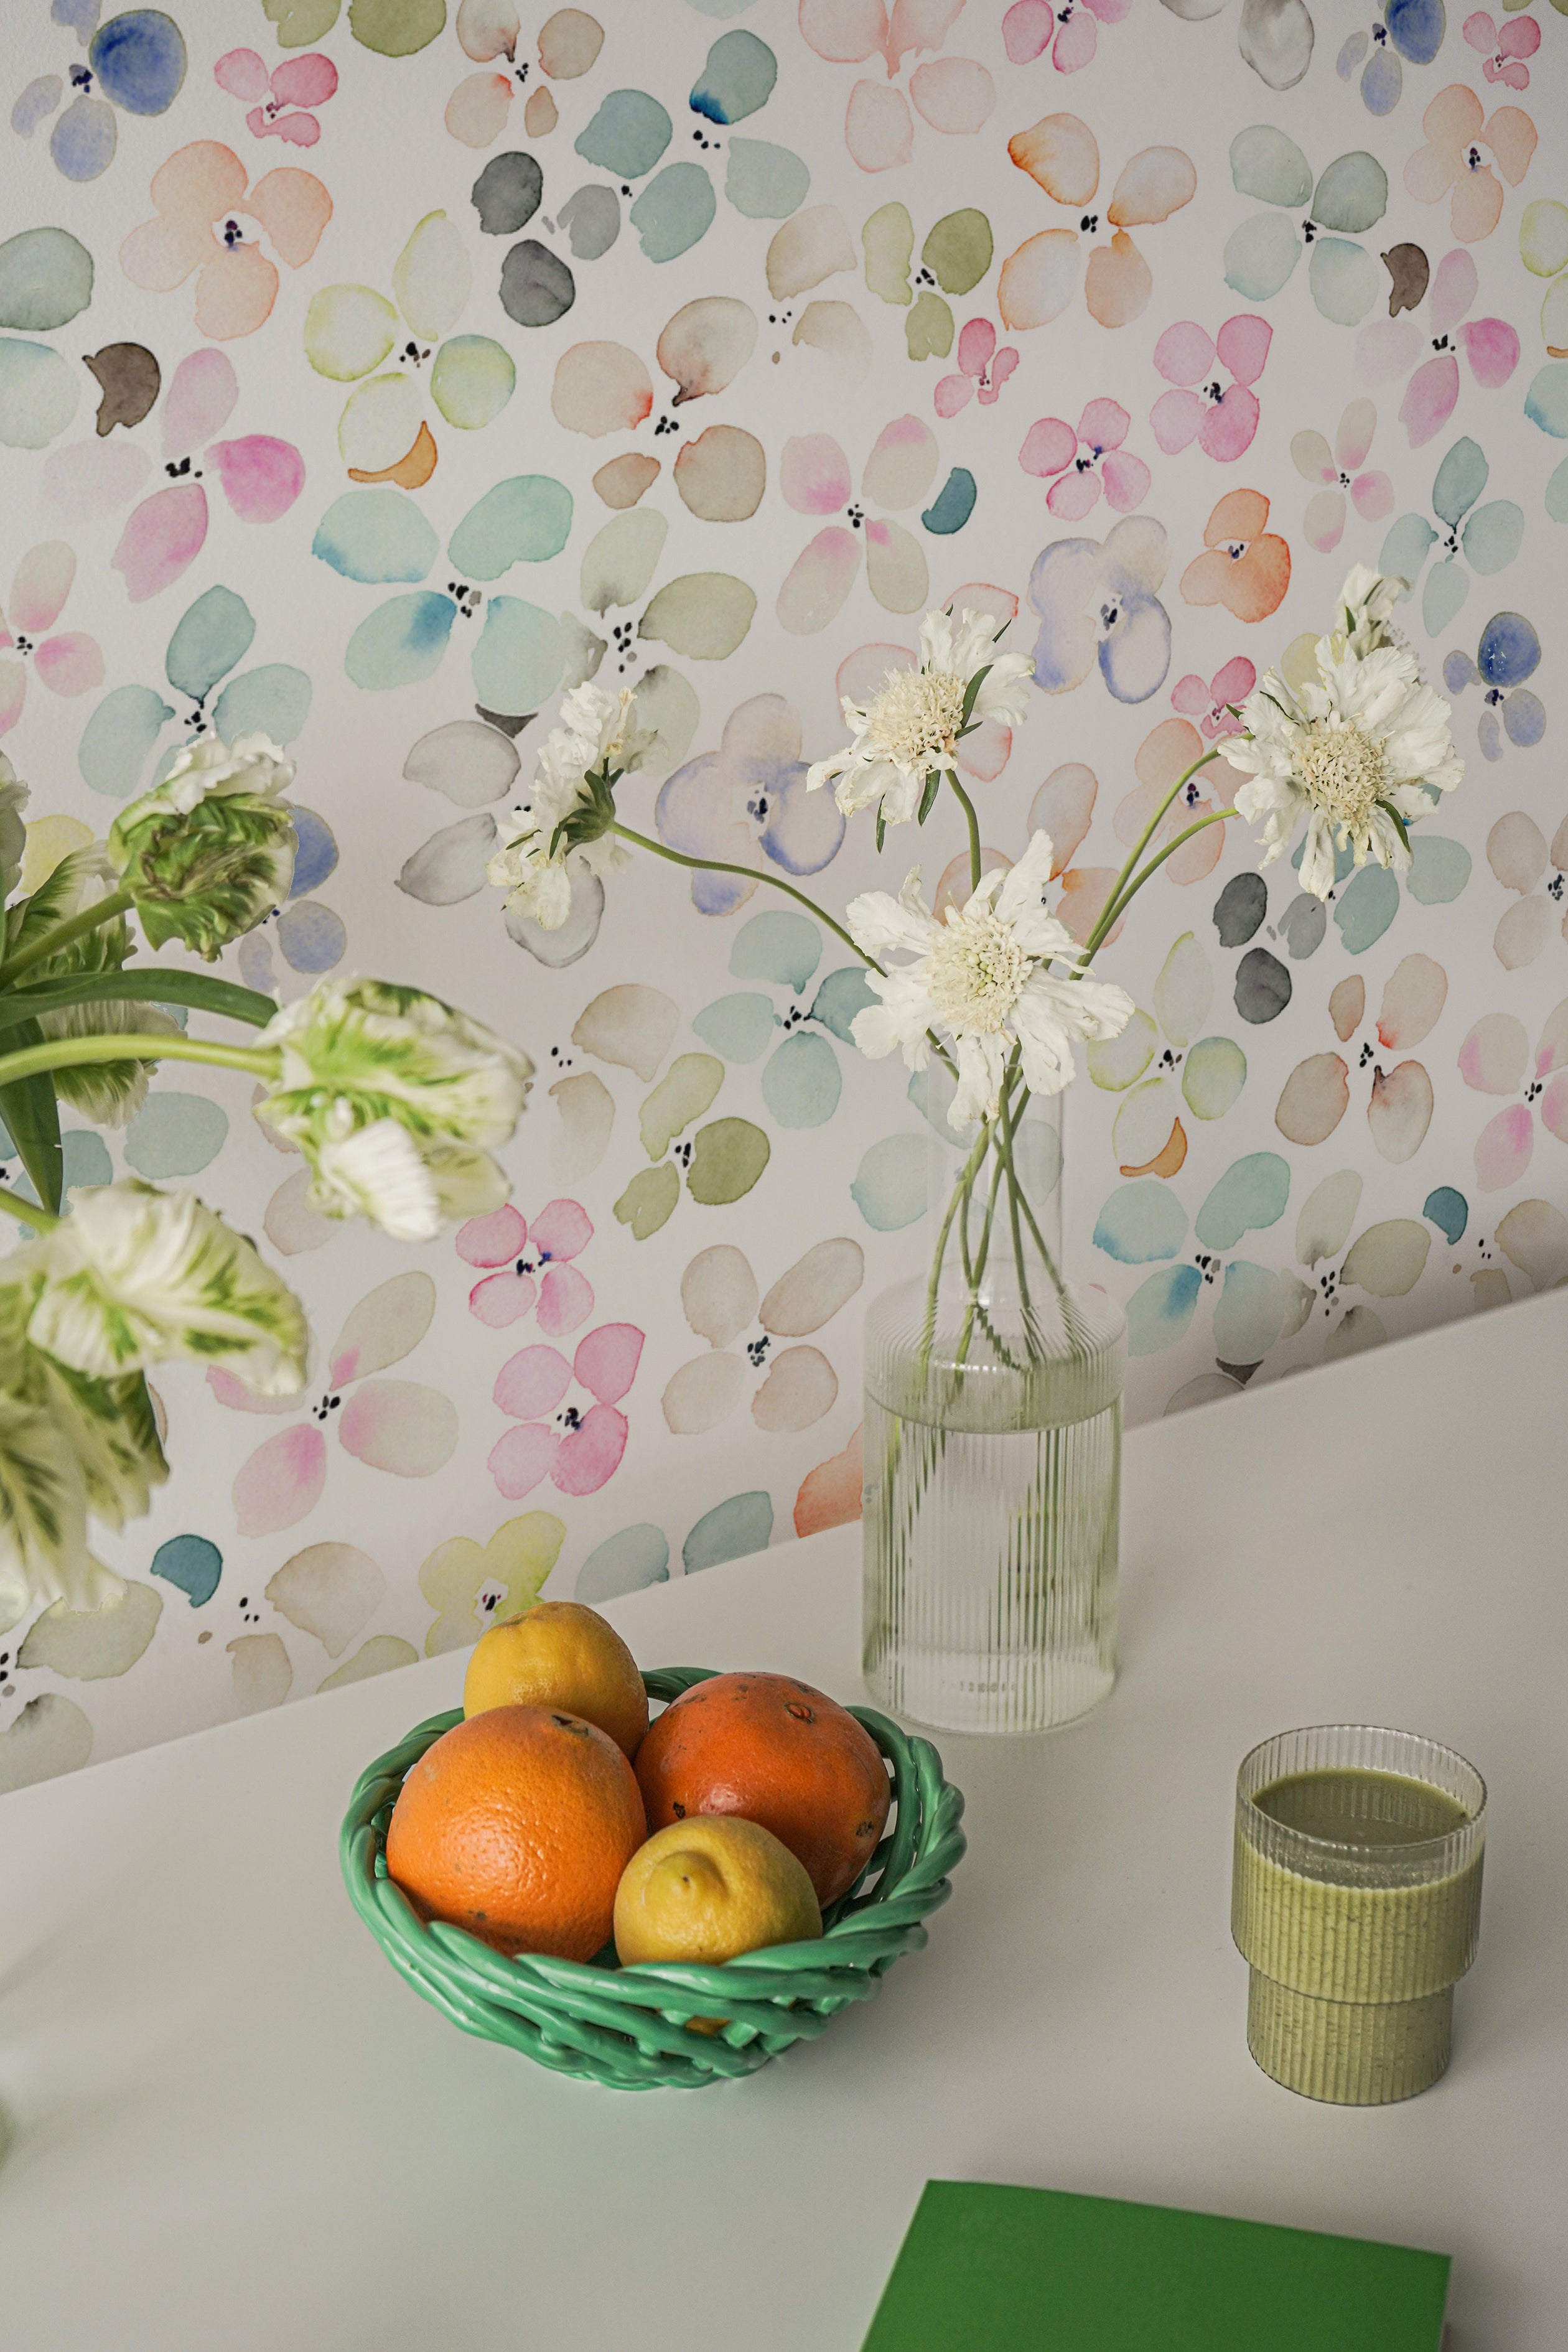 A modern workspace is given a splash of color with the Hand Painted Floral Wallpaper, featuring a myriad of watercolor flowers in pastel shades. A white desk with fresh flowers, a bowl of citrus fruit, and a light green book create a scene of vibrant yet serene productivity.